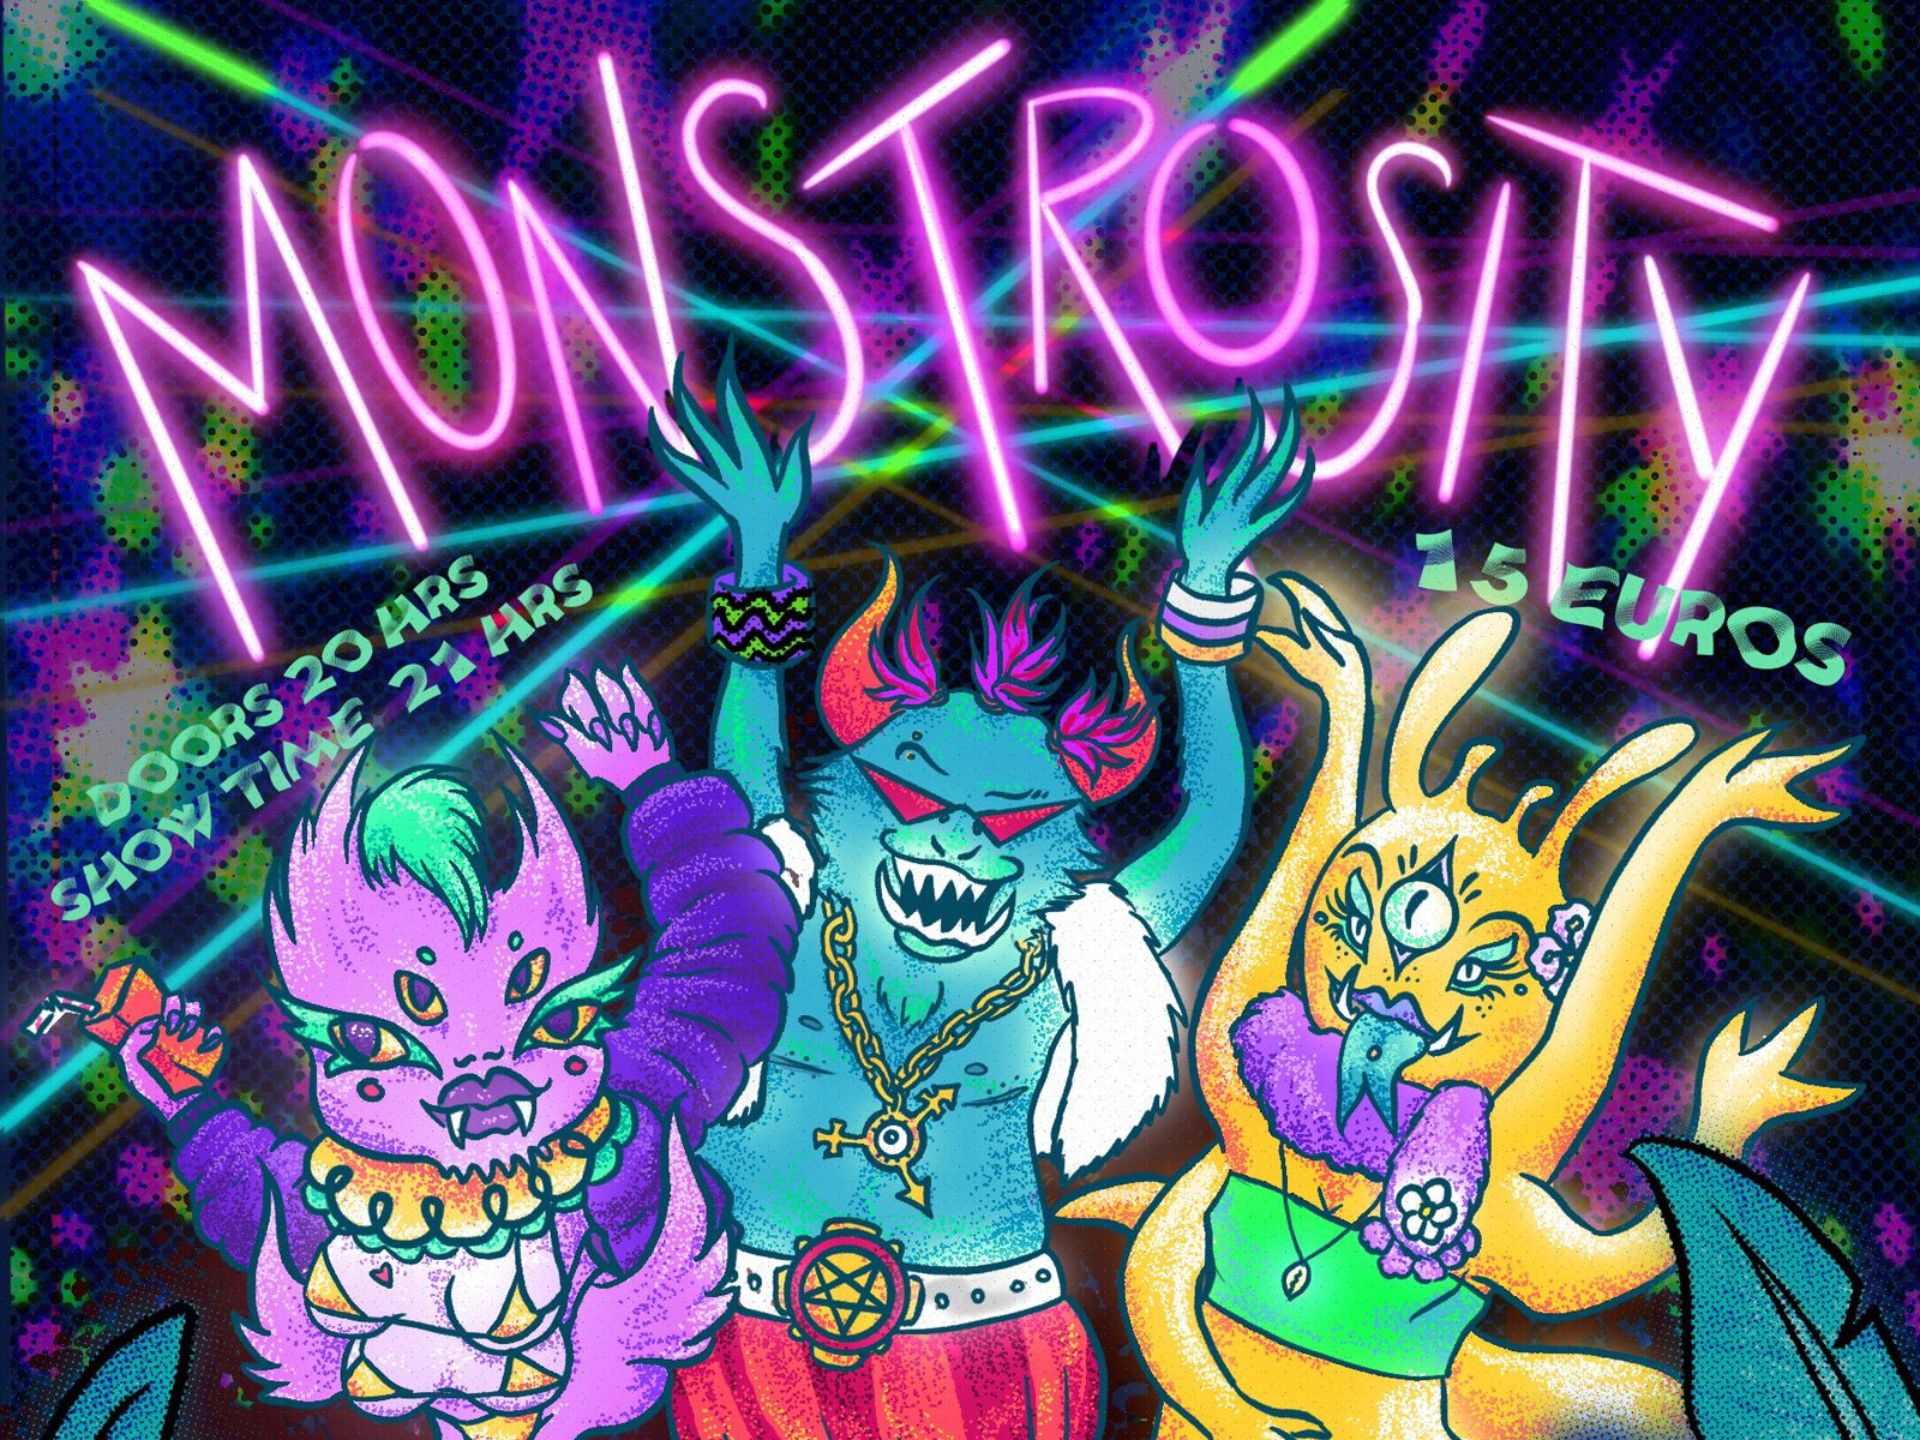 Monstrosity Show – Trans Visibility Day